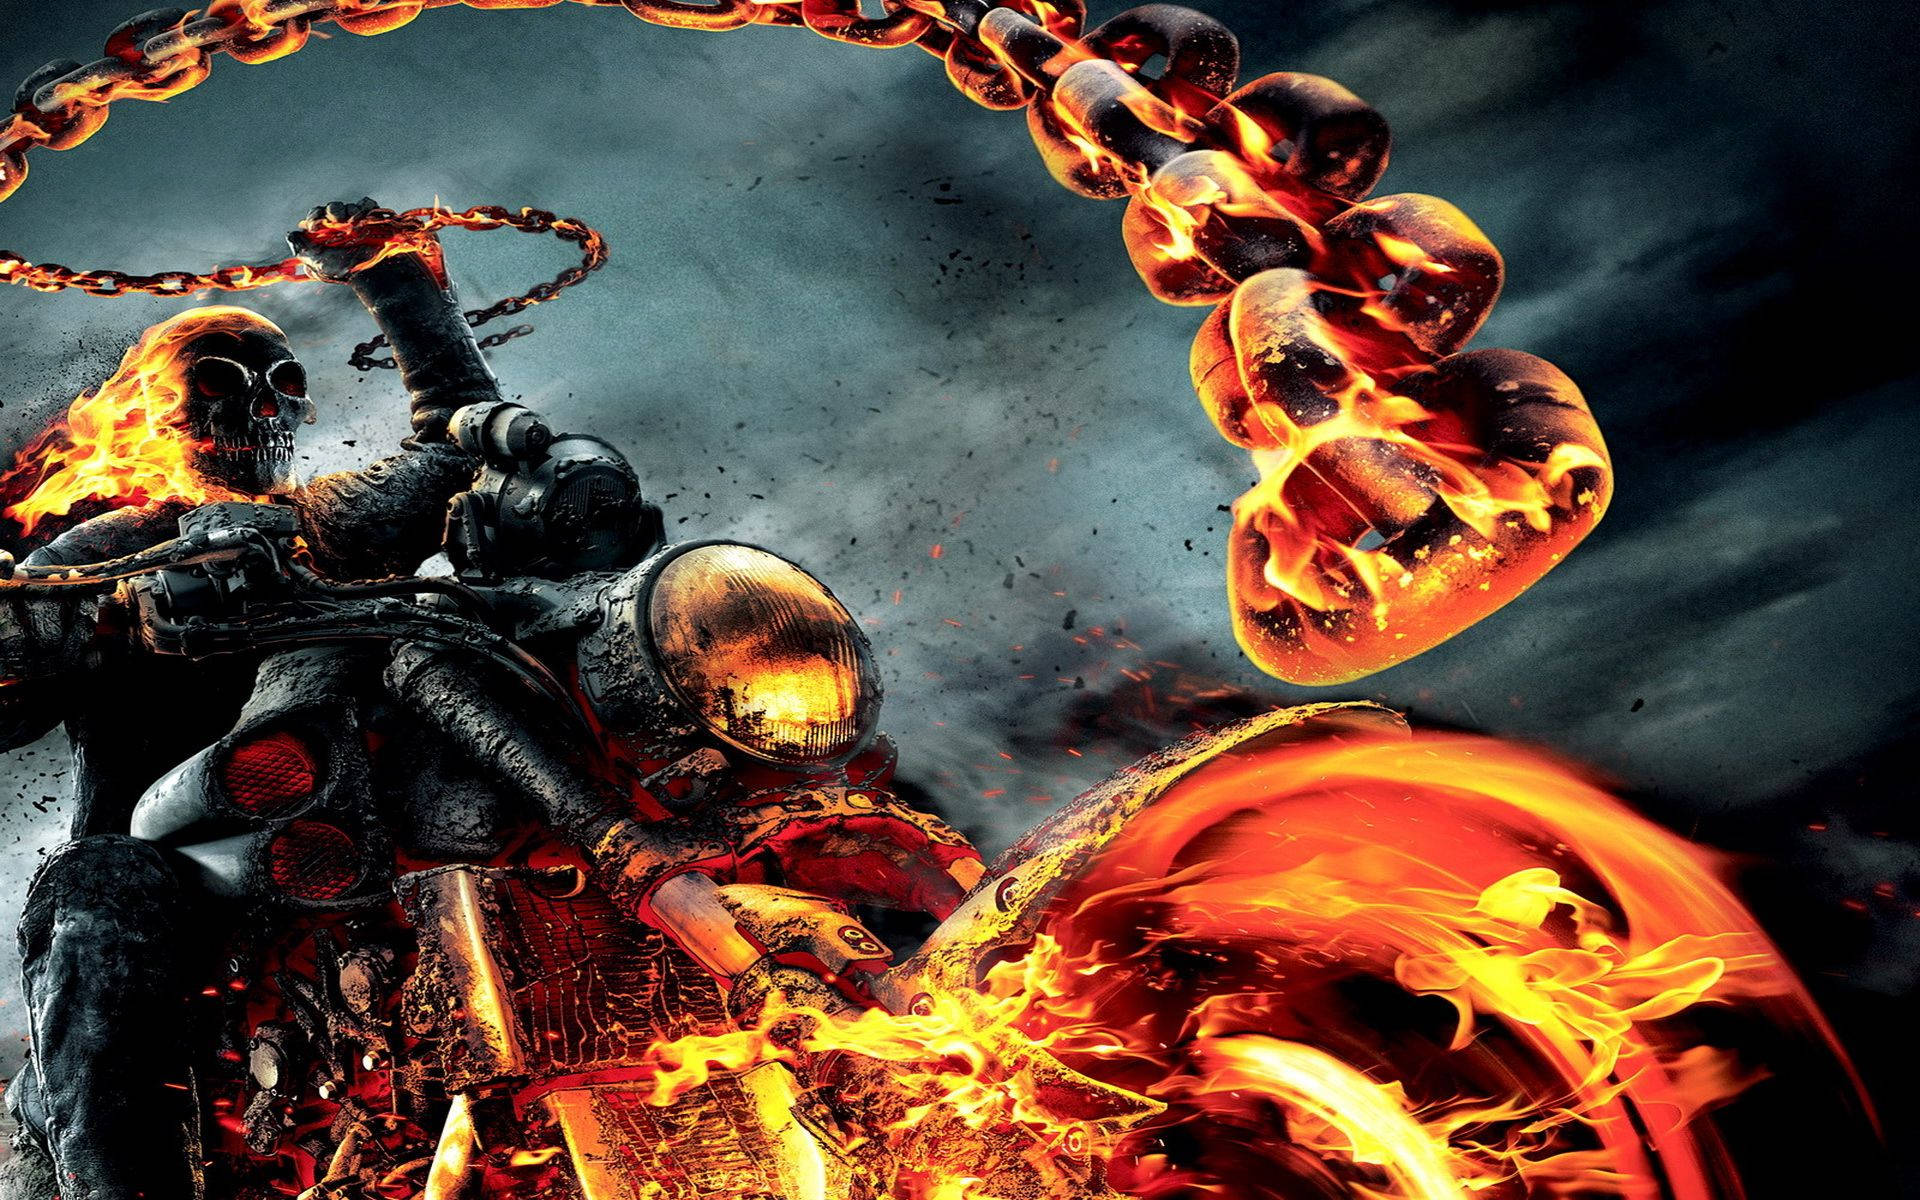 Cool 3D Ghost Rider With Infernal Chain Wallpaper